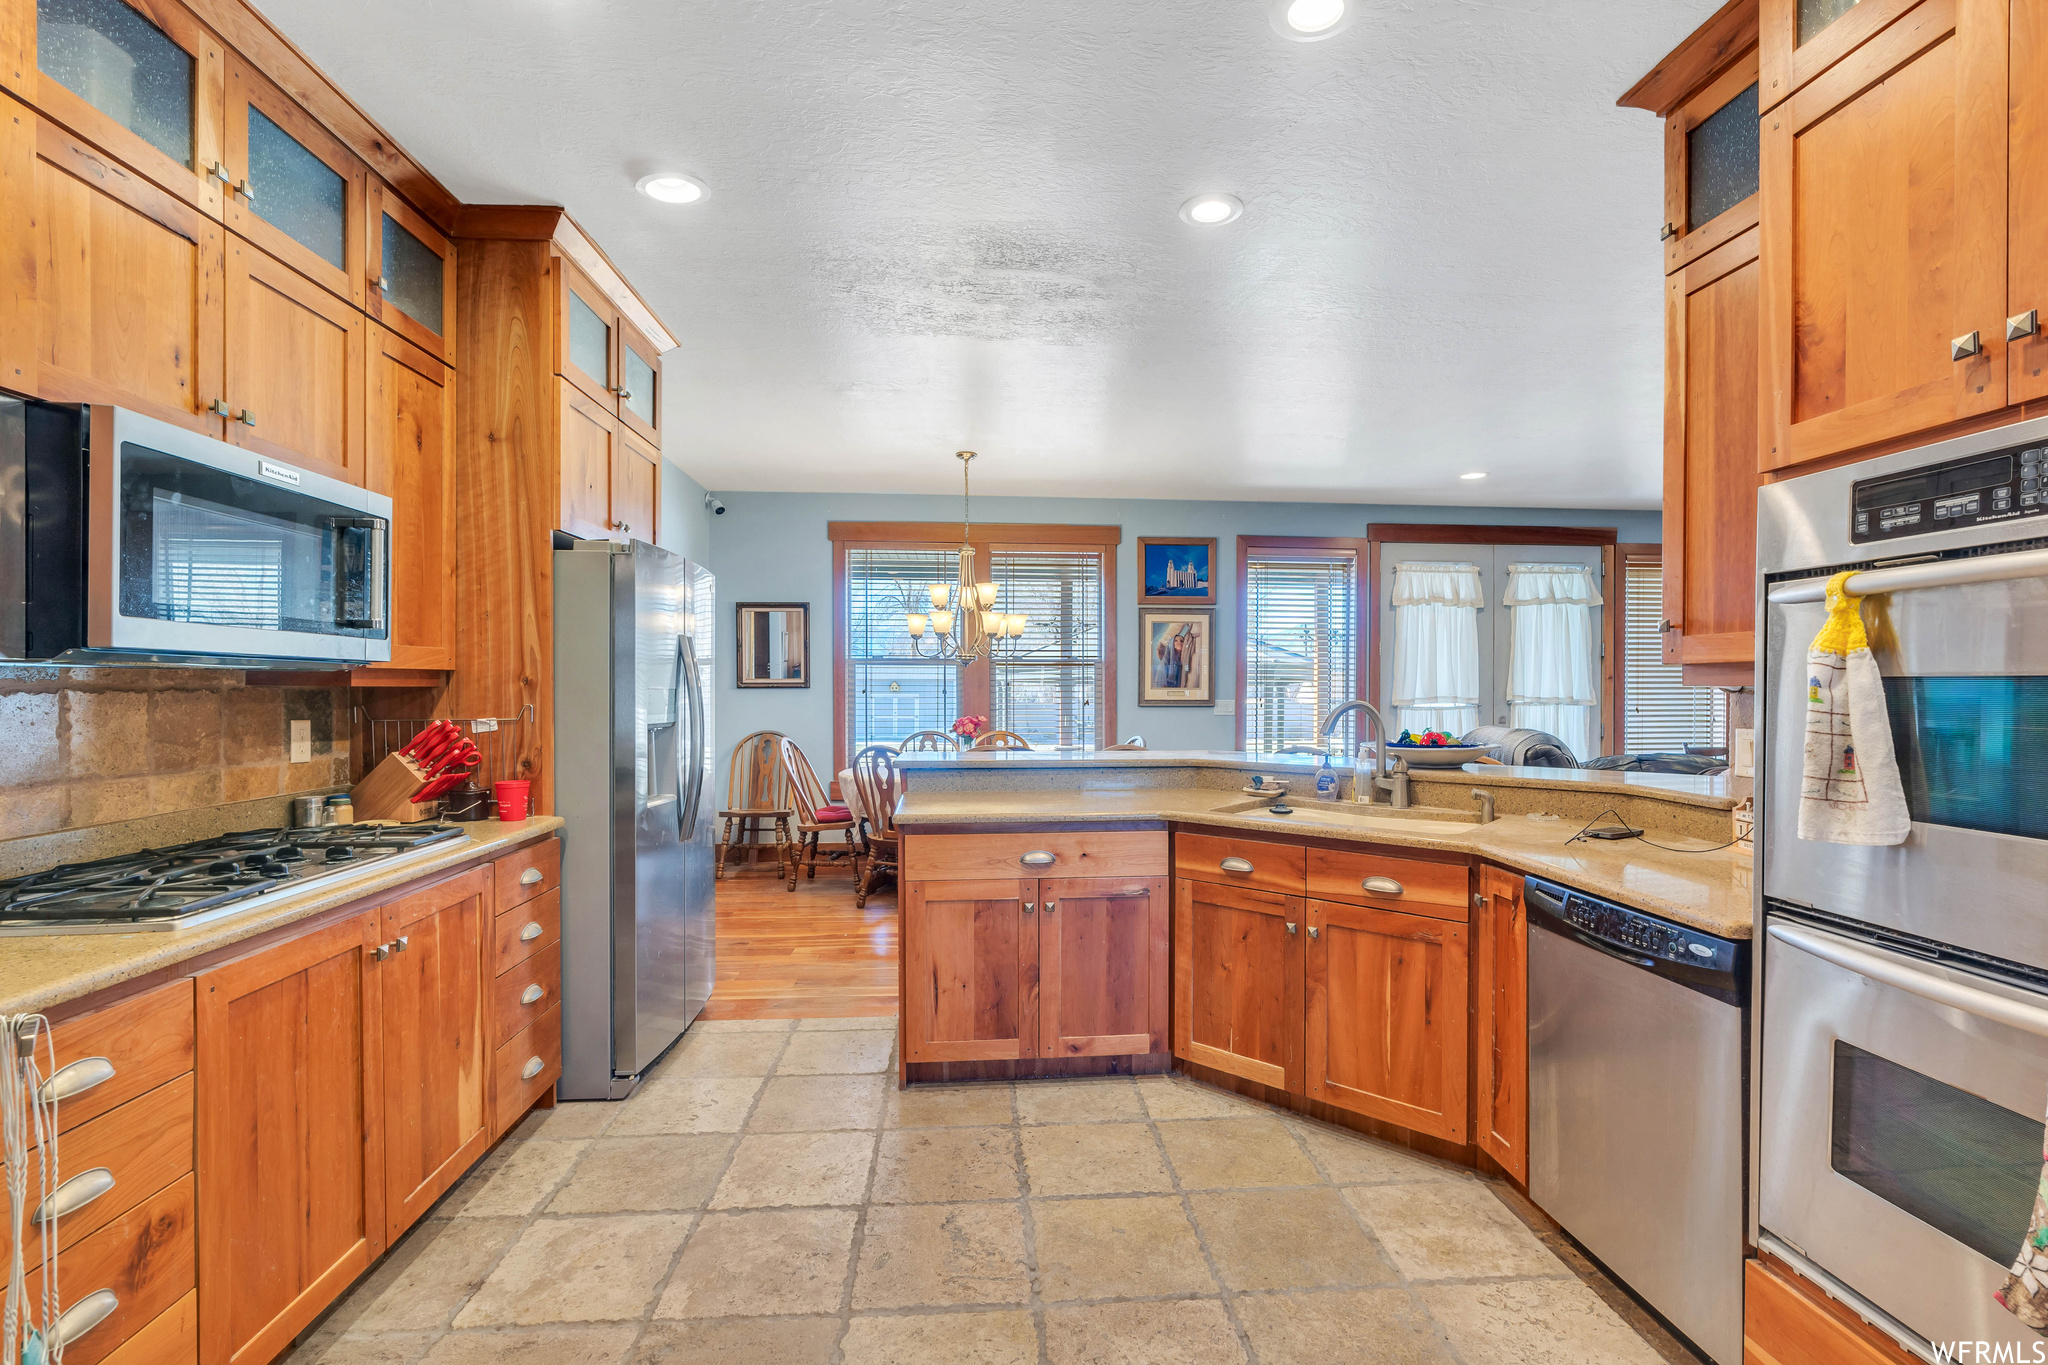 Kitchen with a notable chandelier, sink, stainless steel appliances, decorative light fixtures, and light tile floors